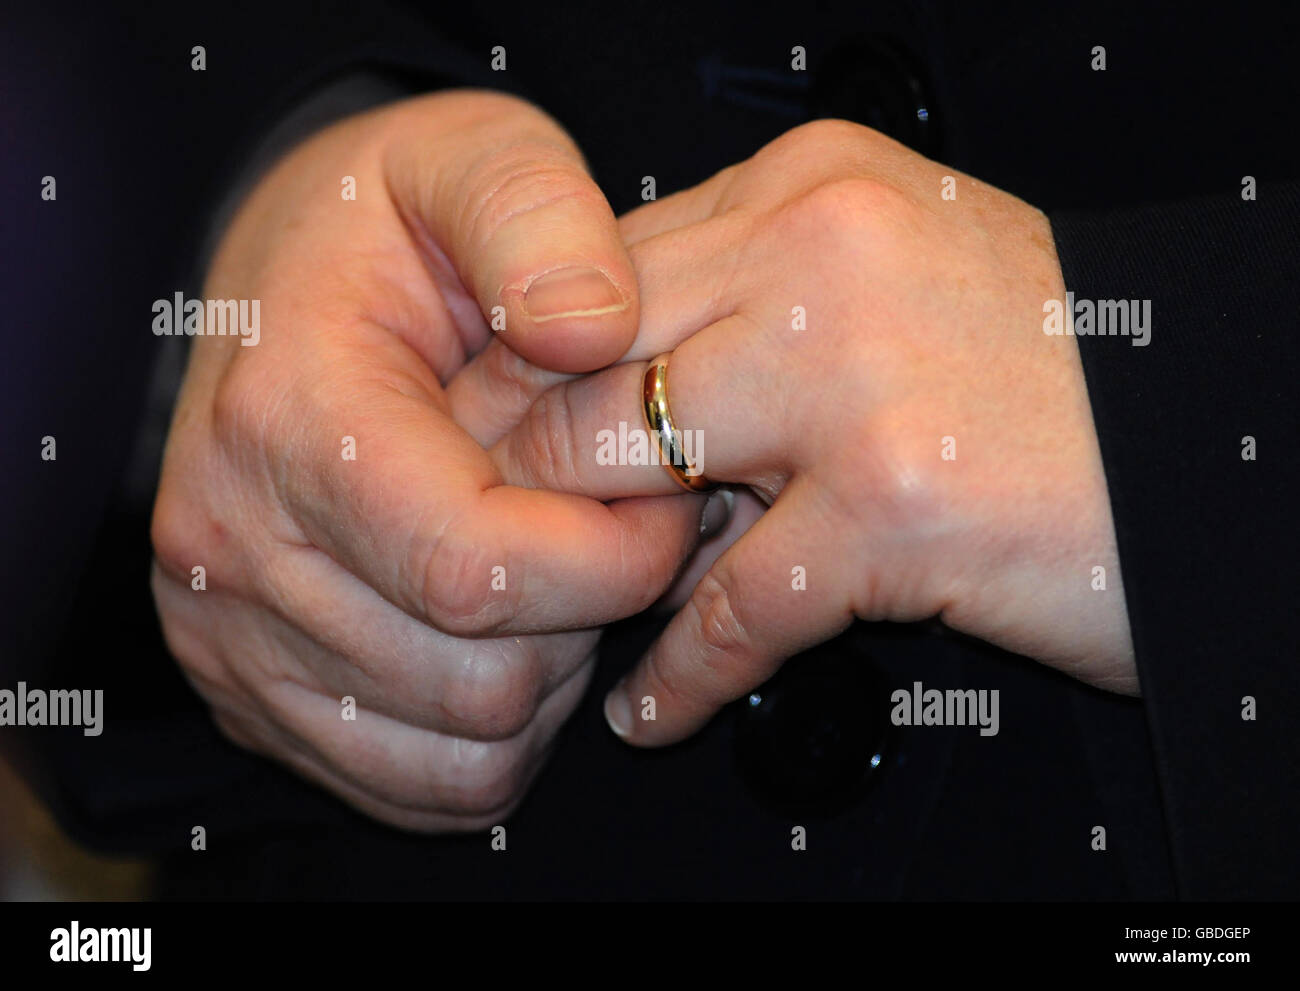 A close up of Home Secretary Jacqui Smith's hands during a visit to the Refuge domestic violence facility at International House, London. Stock Photo